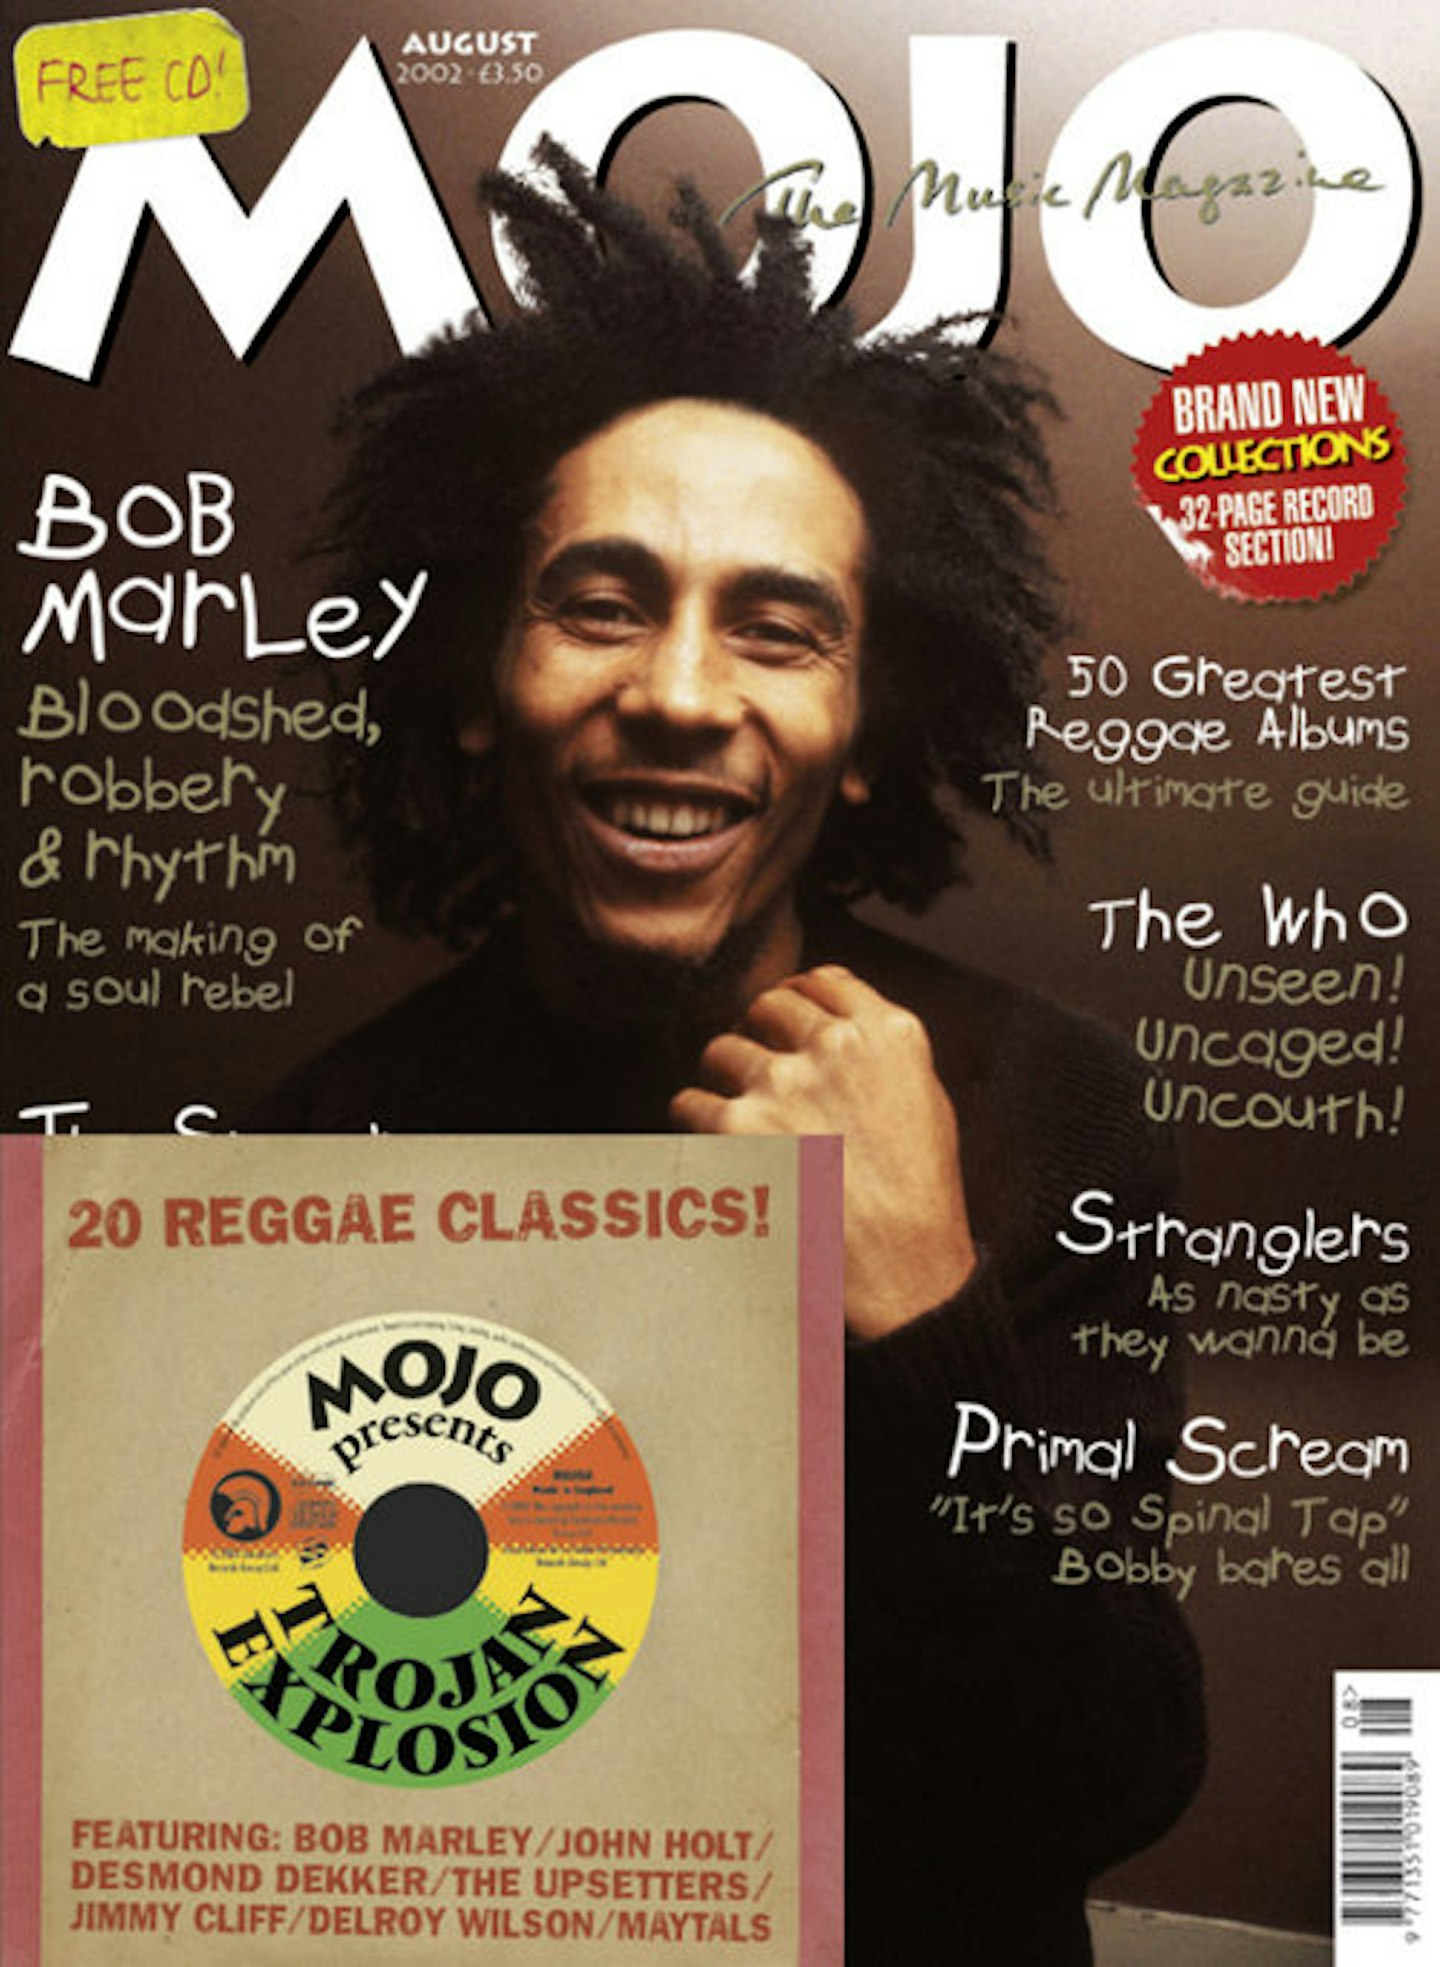 MOJO Issue 105 / August 2002